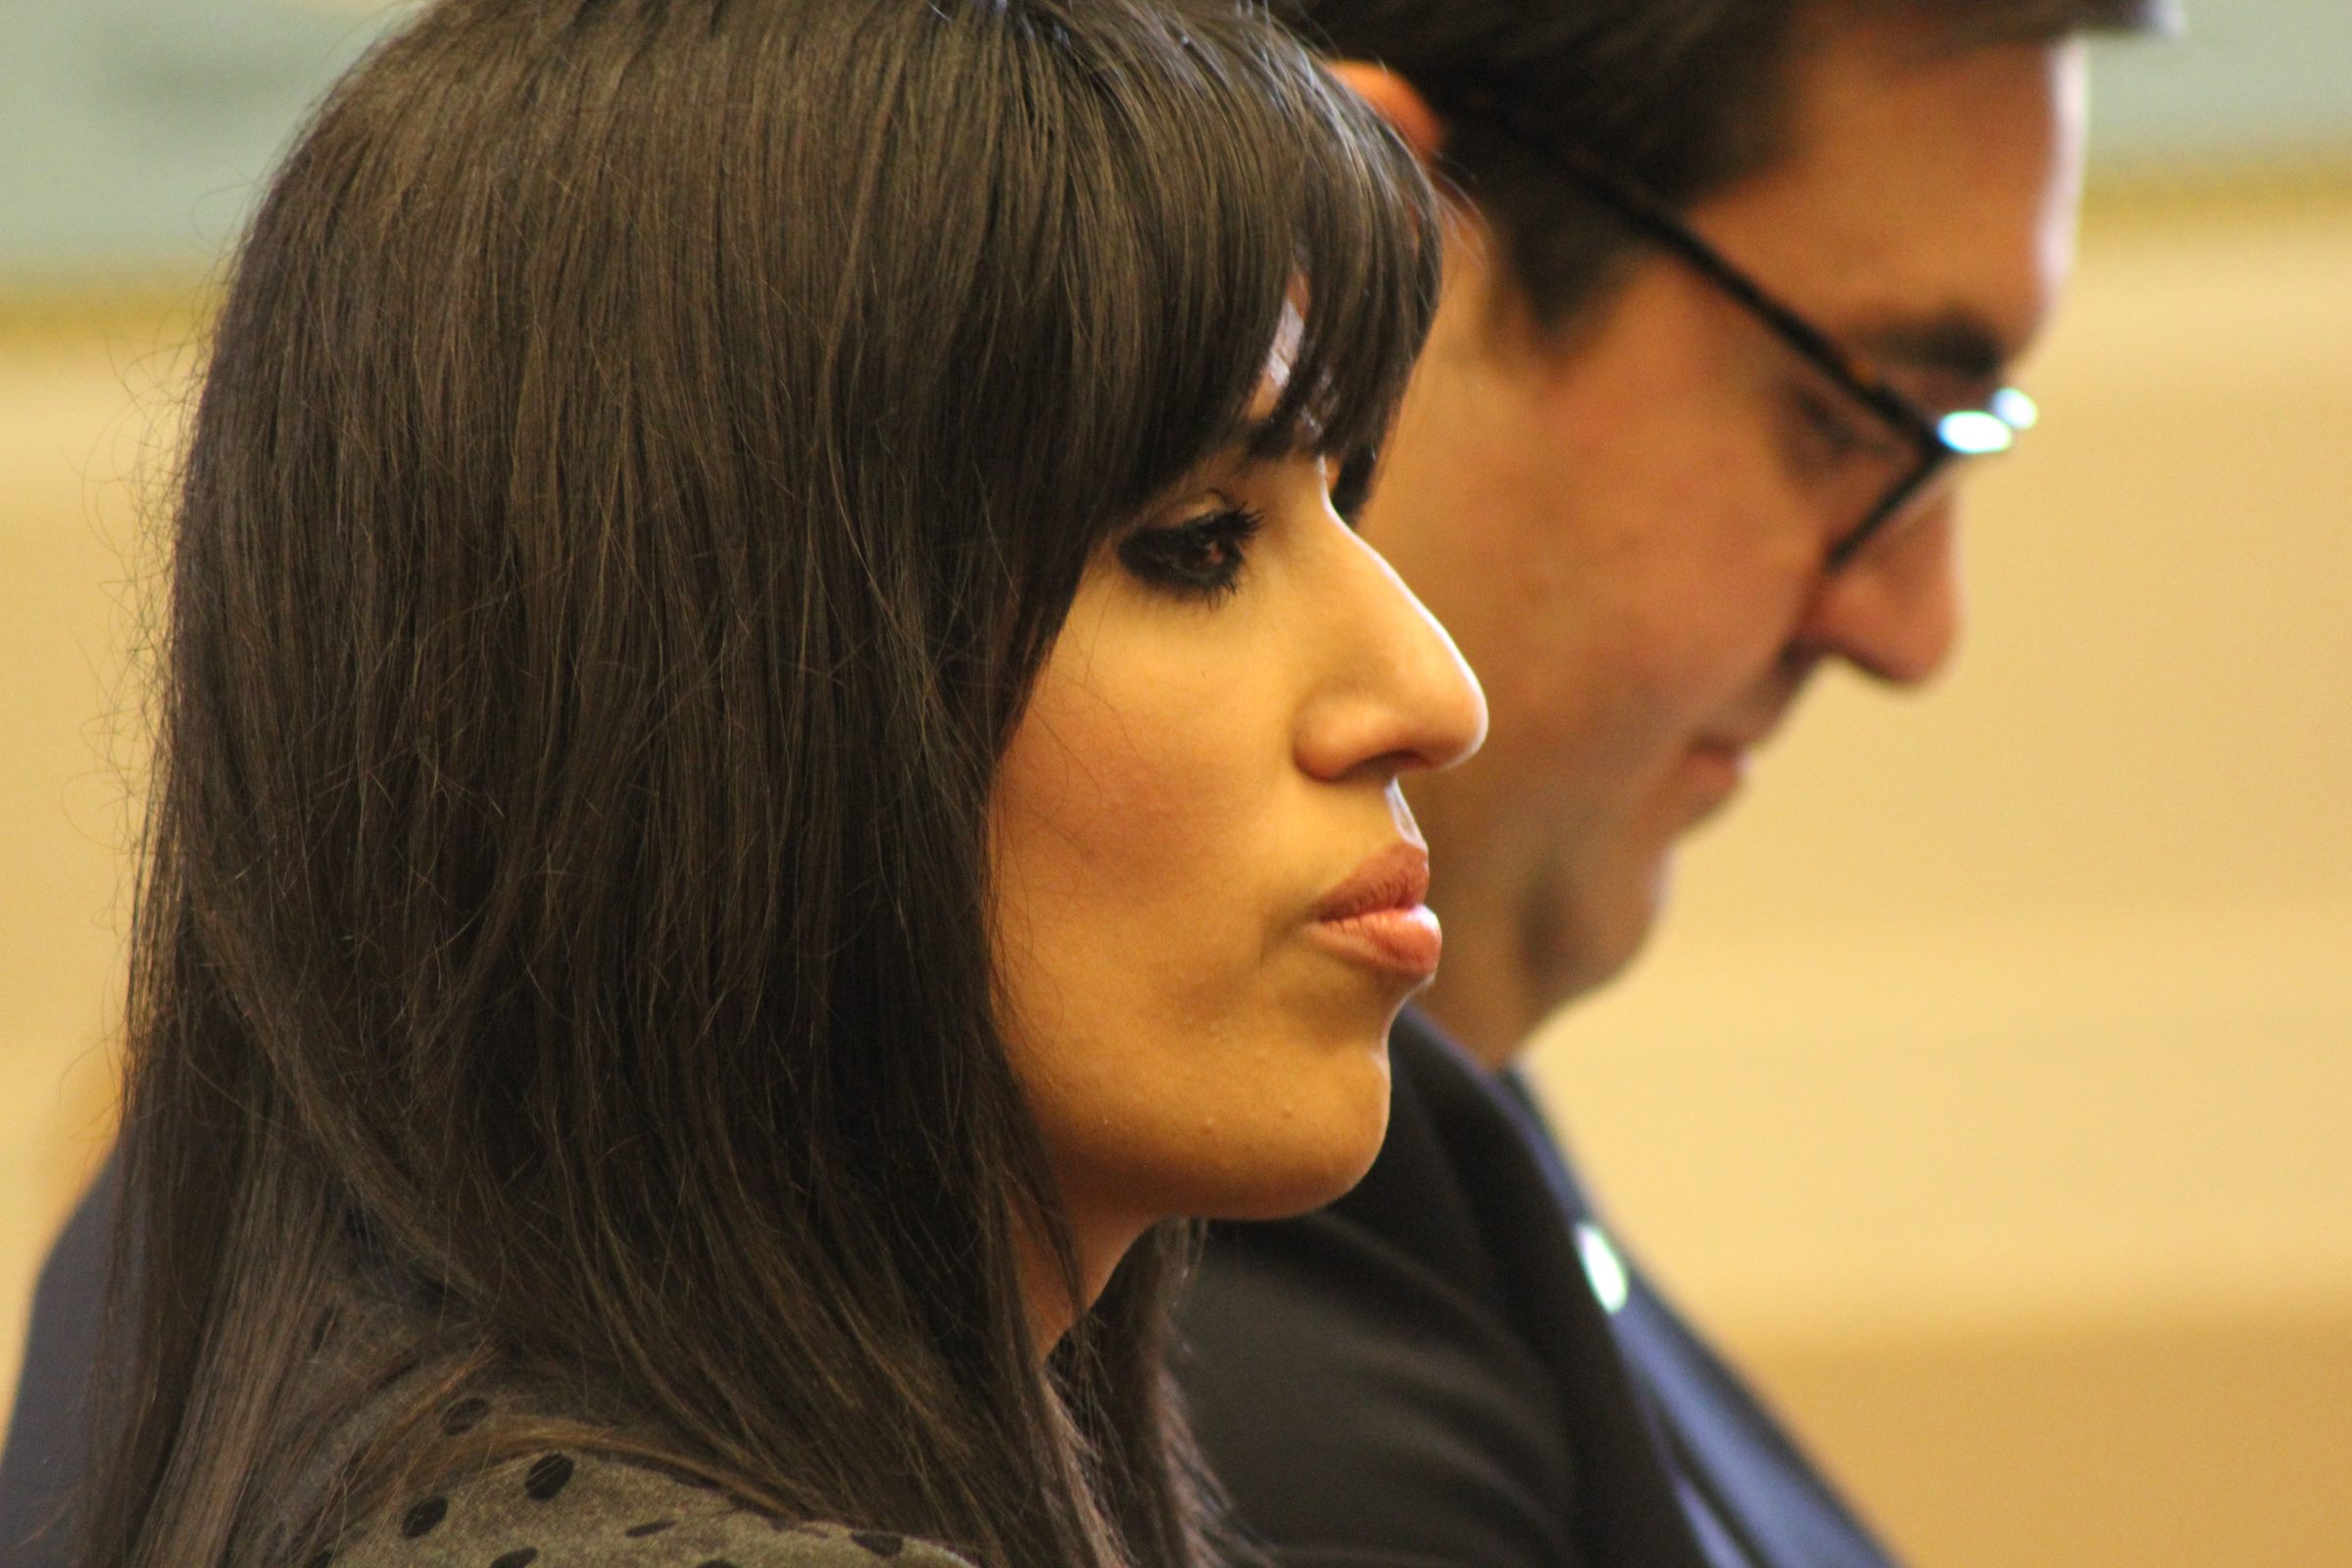 (RNS1-mar15) Naghmeh Abedini, wife of imprisoned Iranian-American minister Saeed Abedini, at Capitol Hill hearing on religious minorities in Iran on March 15, 2013. Behind her is her lawyer, Jordan Sekulow, executive director of the American Center for Law and Justice. For use with RNS-IRAN-FREEDOM, transmitted on March 15, 2013, RNS photo by Adelle M. Banks.